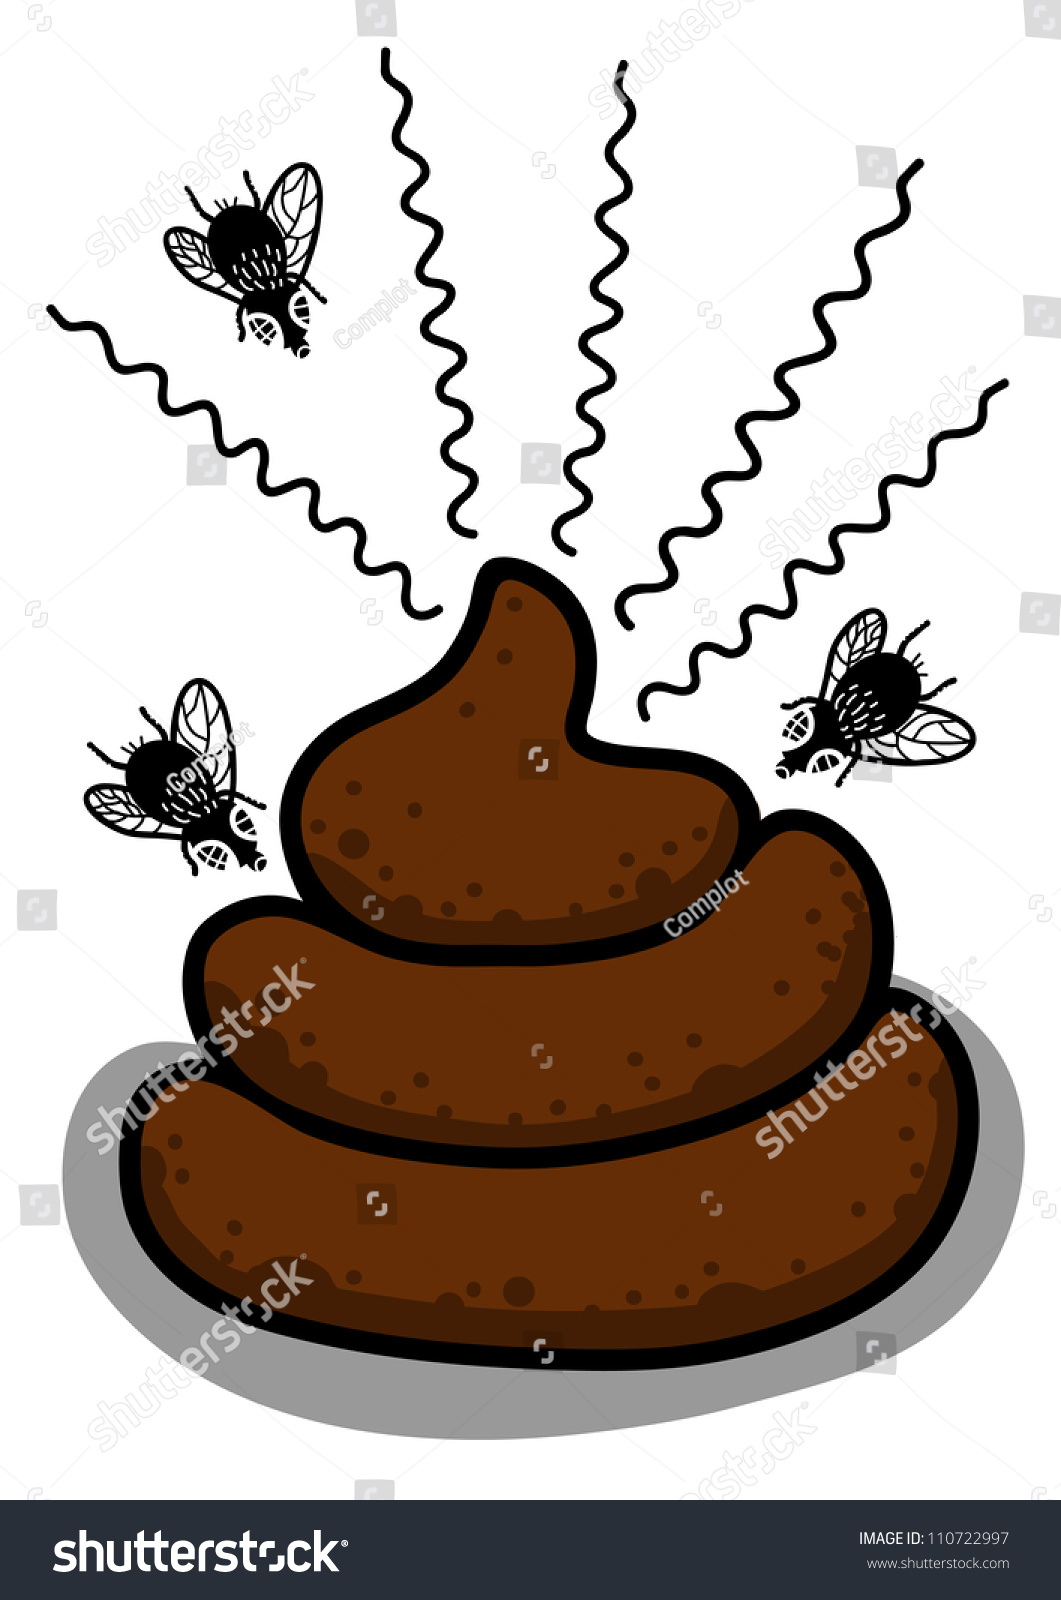 clipart poop pictures - photo #45